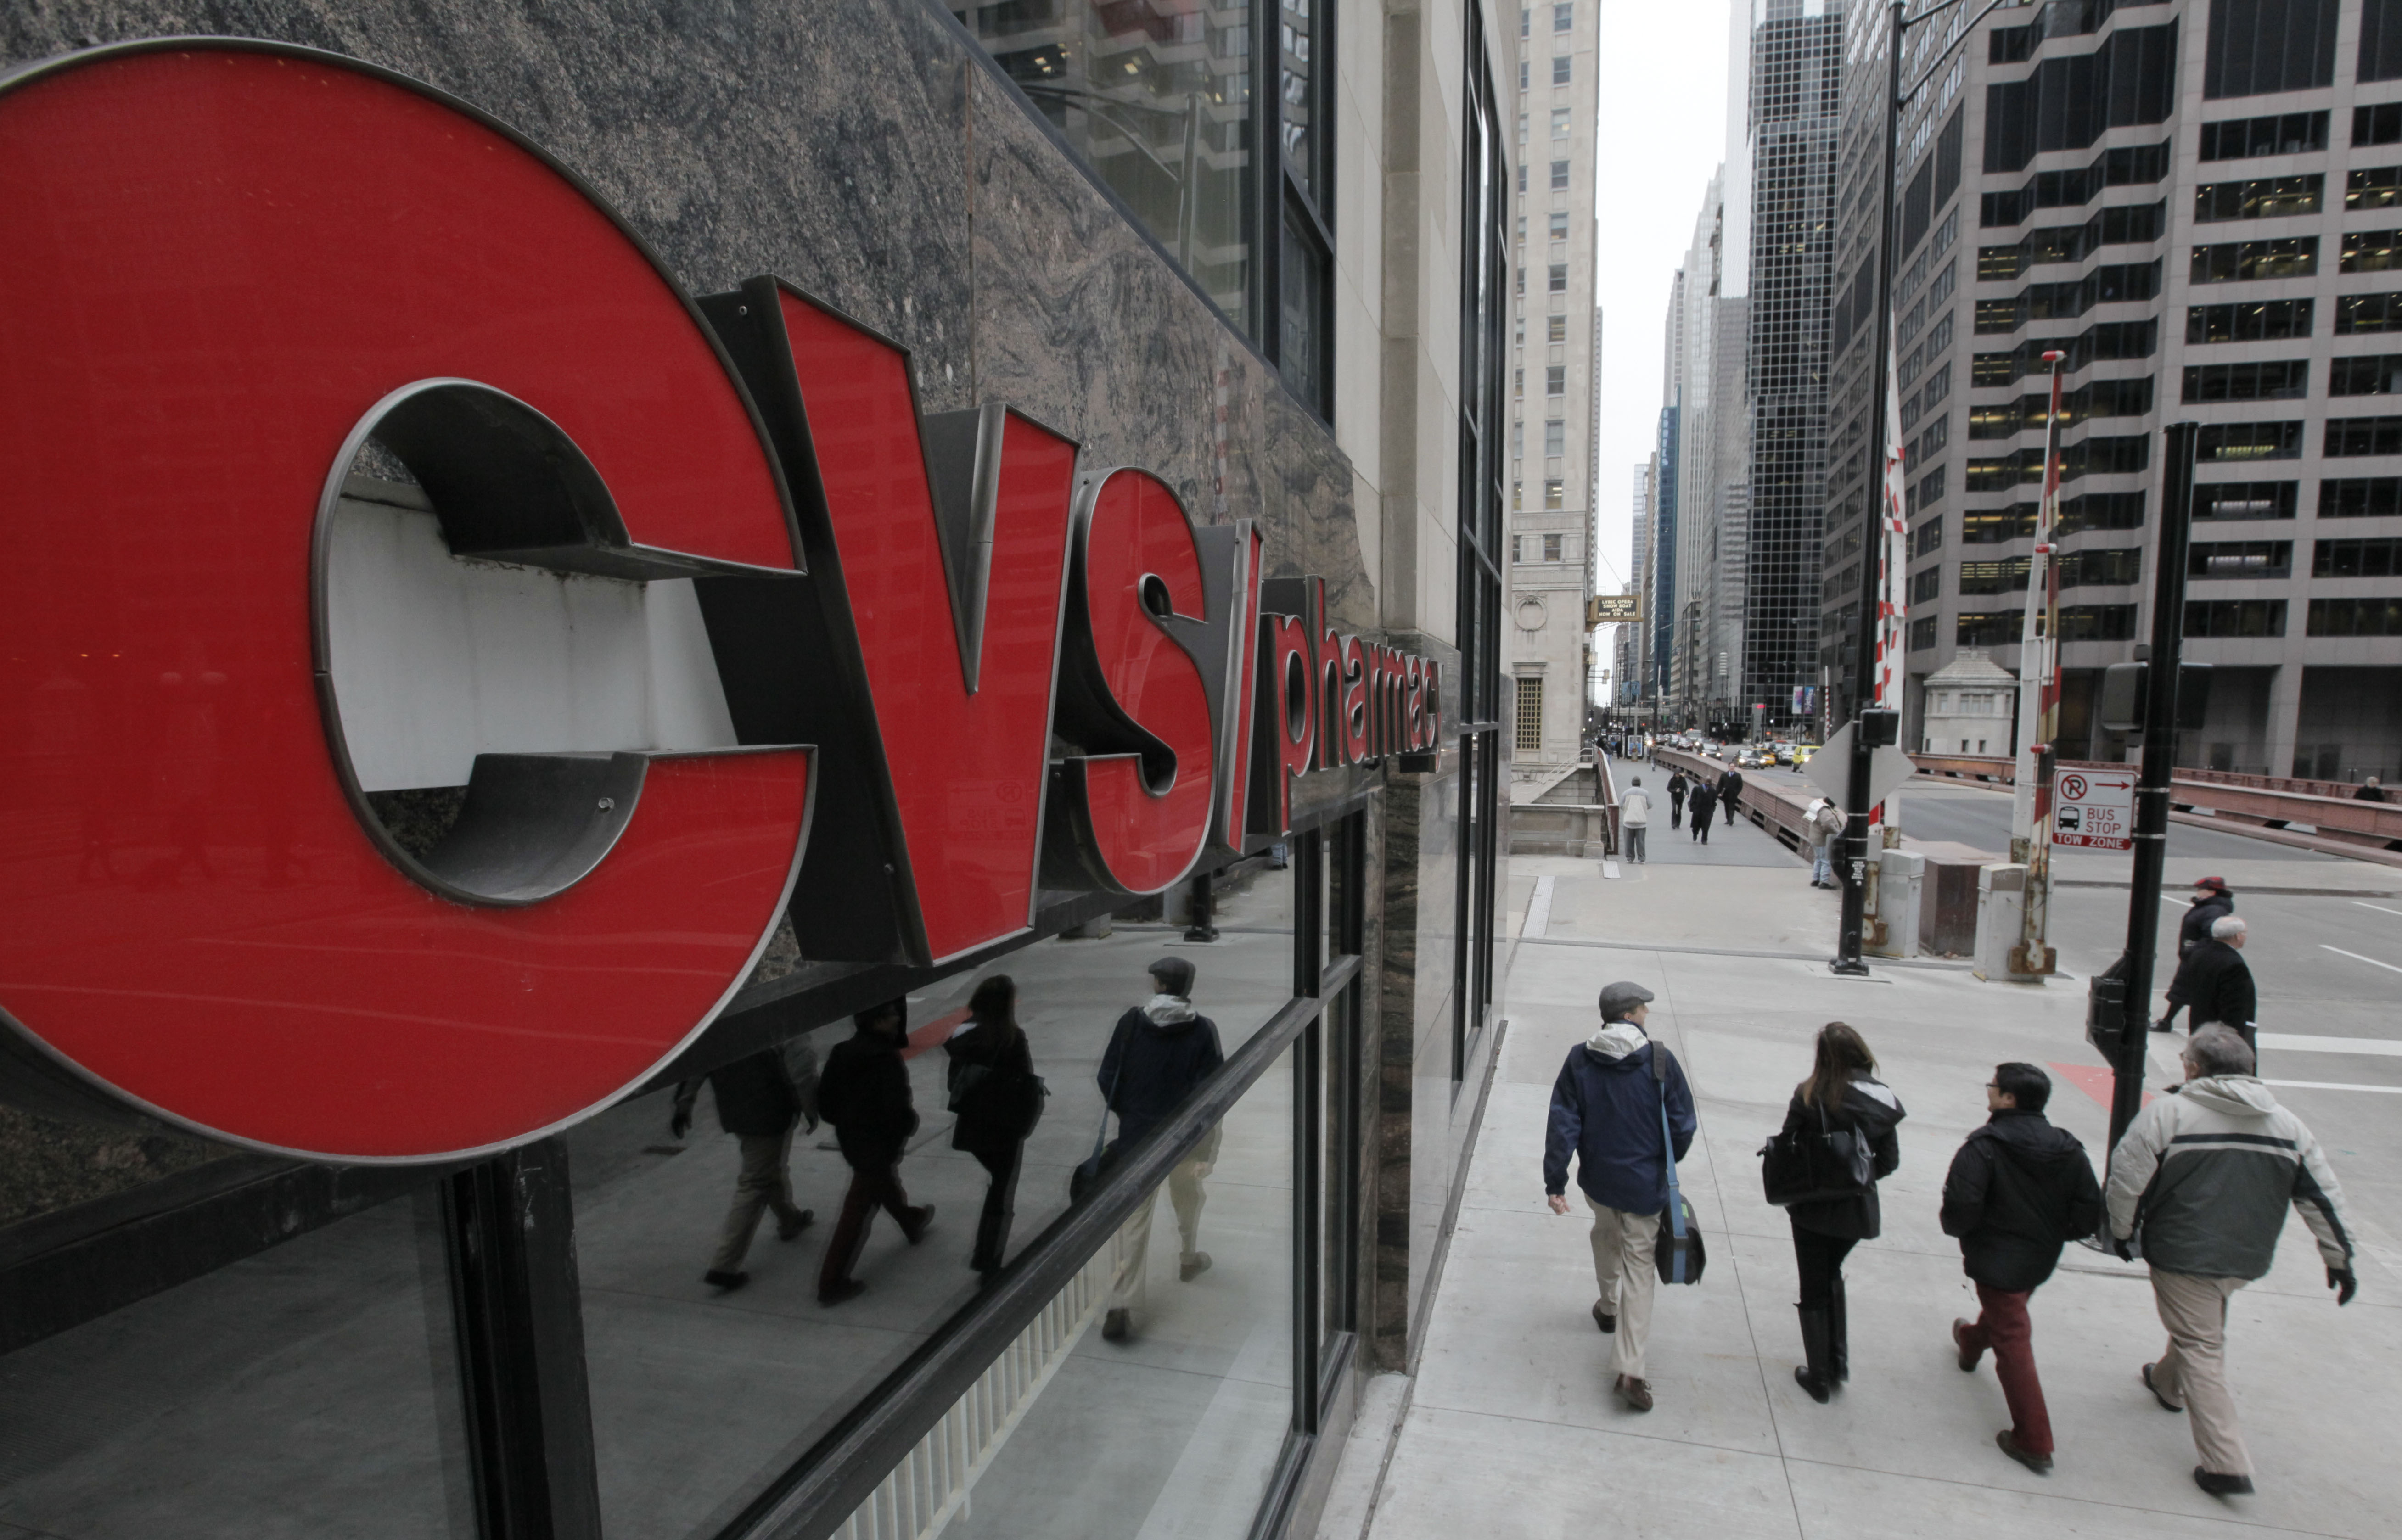 CVS Caremark cut payments to pharmacies amid $70 billion deal to buy Aetna - Side Effects